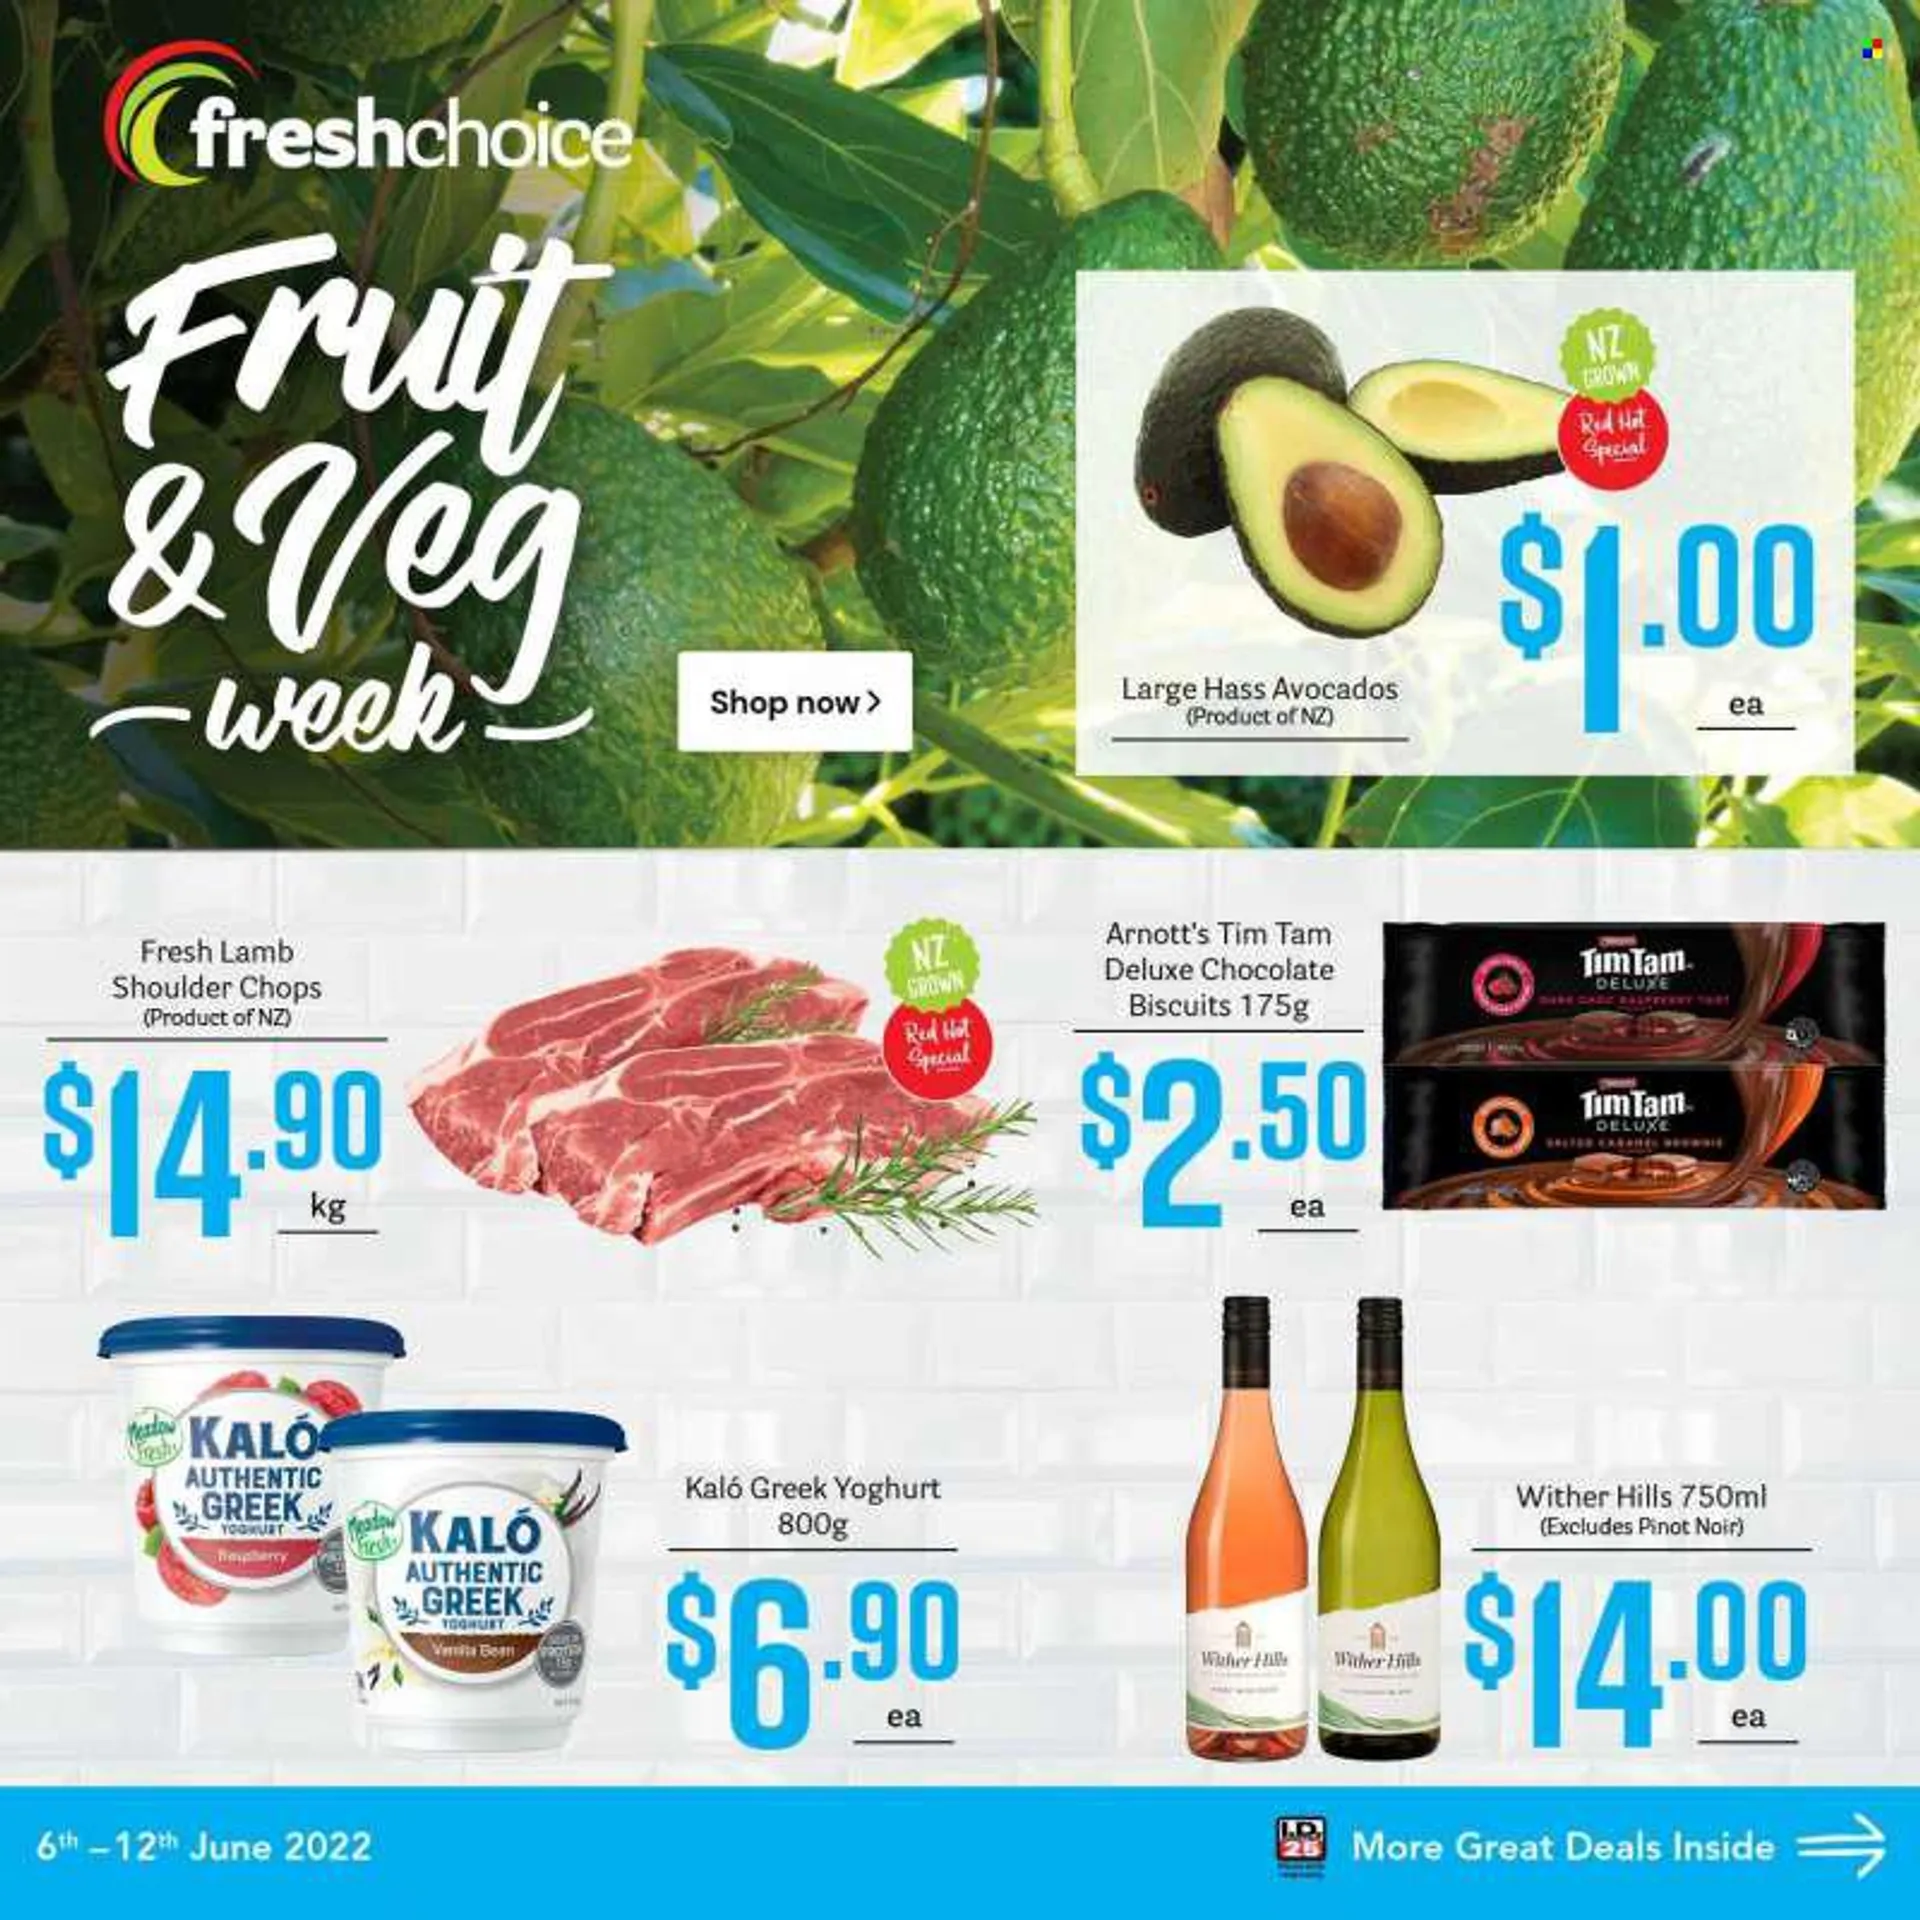 Fresh Choice mailer - 06.06.2022 - 12.06.2022. - 6 June 12 June 2022 - Page 1